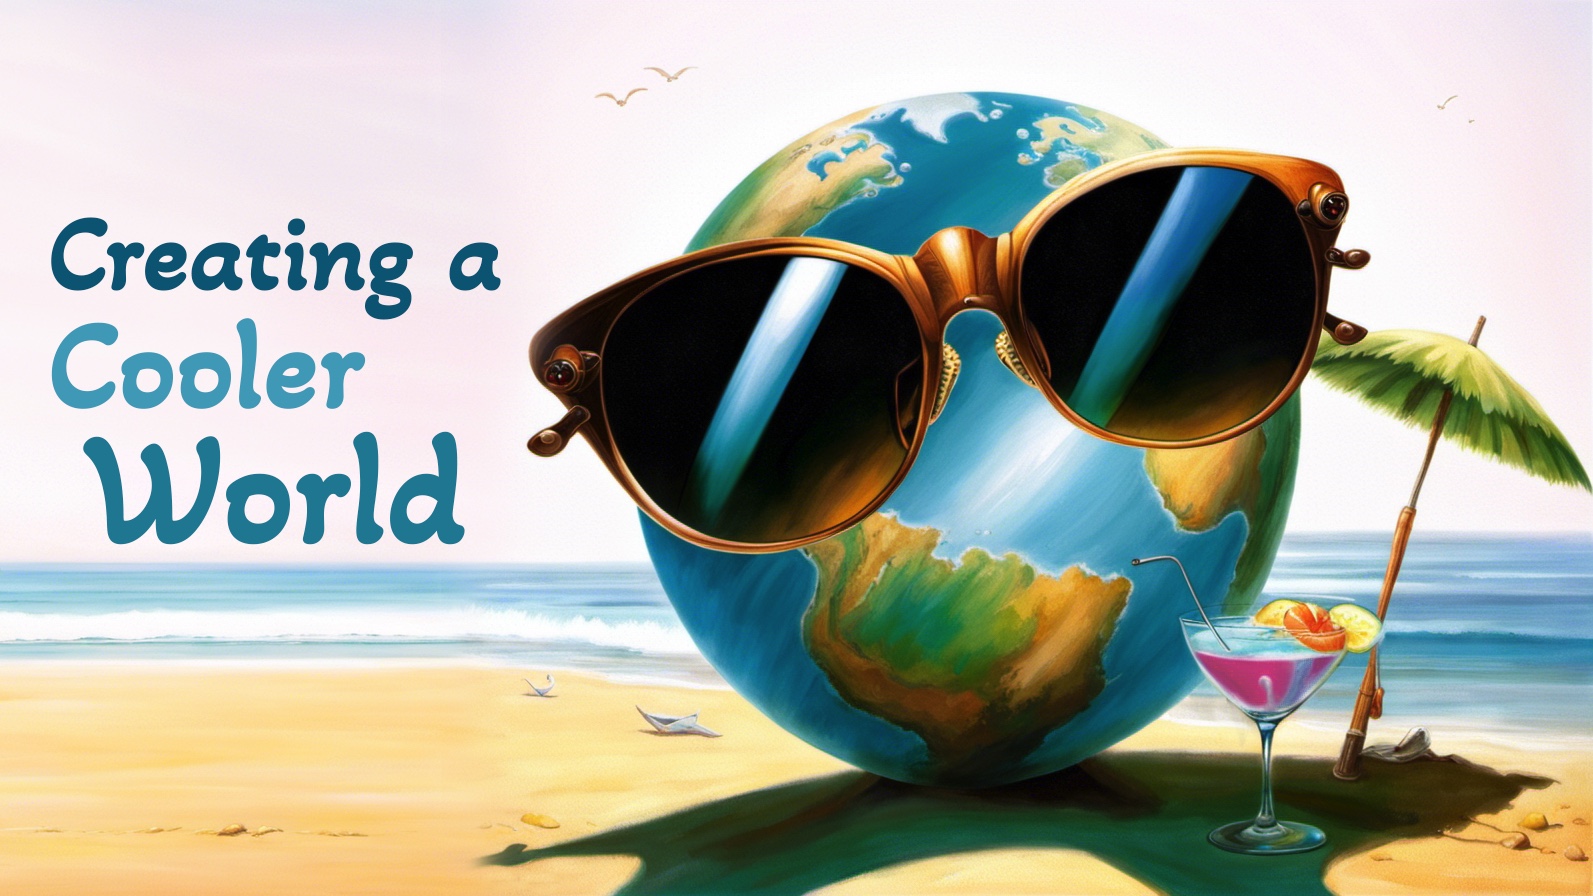 Creating a Cooler World logo: the Earth on the beach wearing sunglasses with text that reads, "Creating a Cooler World."